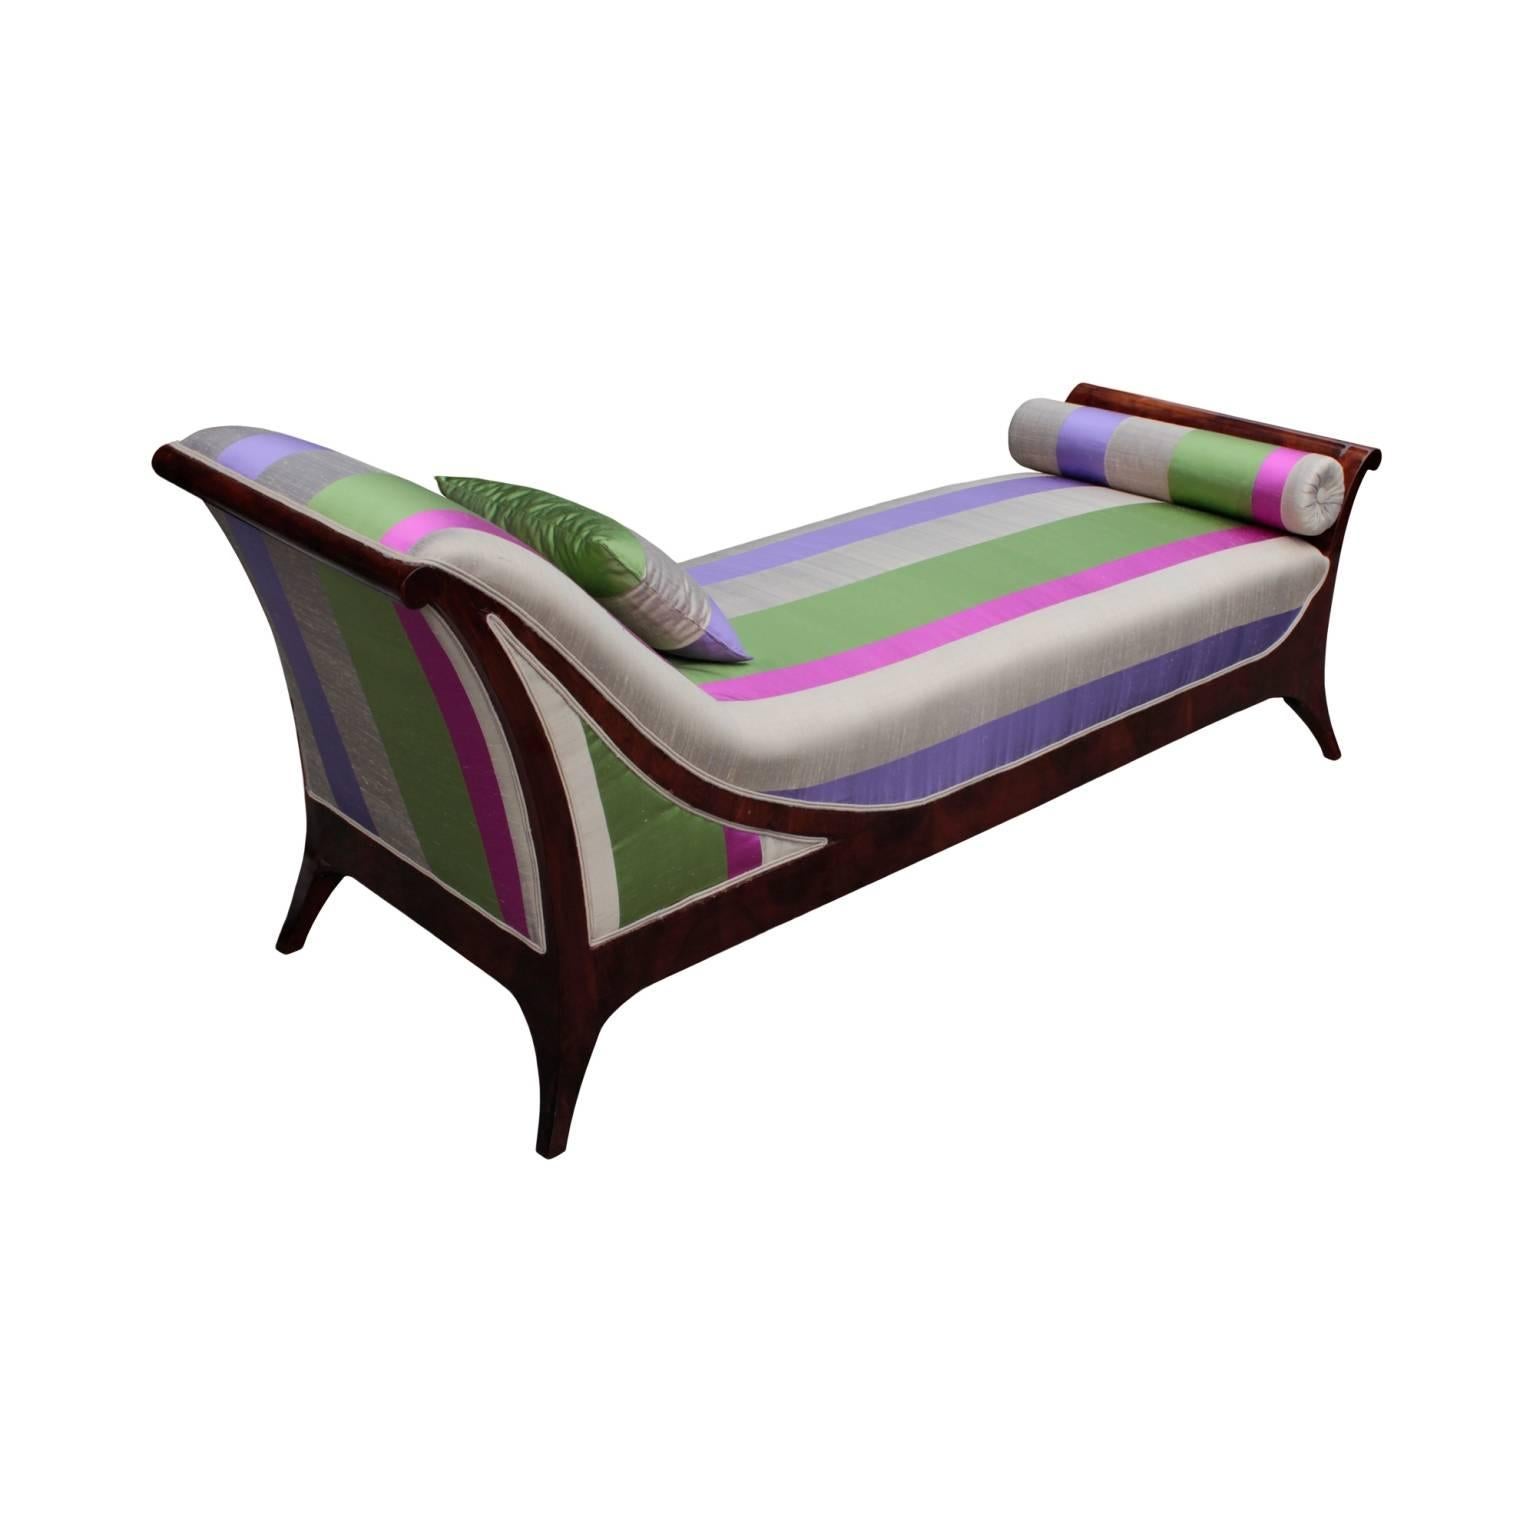 Rare, elegant and comfortable Austrian Biedermeier period daybed of curvilinear design with splayed and tapered legs. In French walnut, covered with fine 100% Spanish silk, fabric design emulating Biedermeier period wallpaper. 